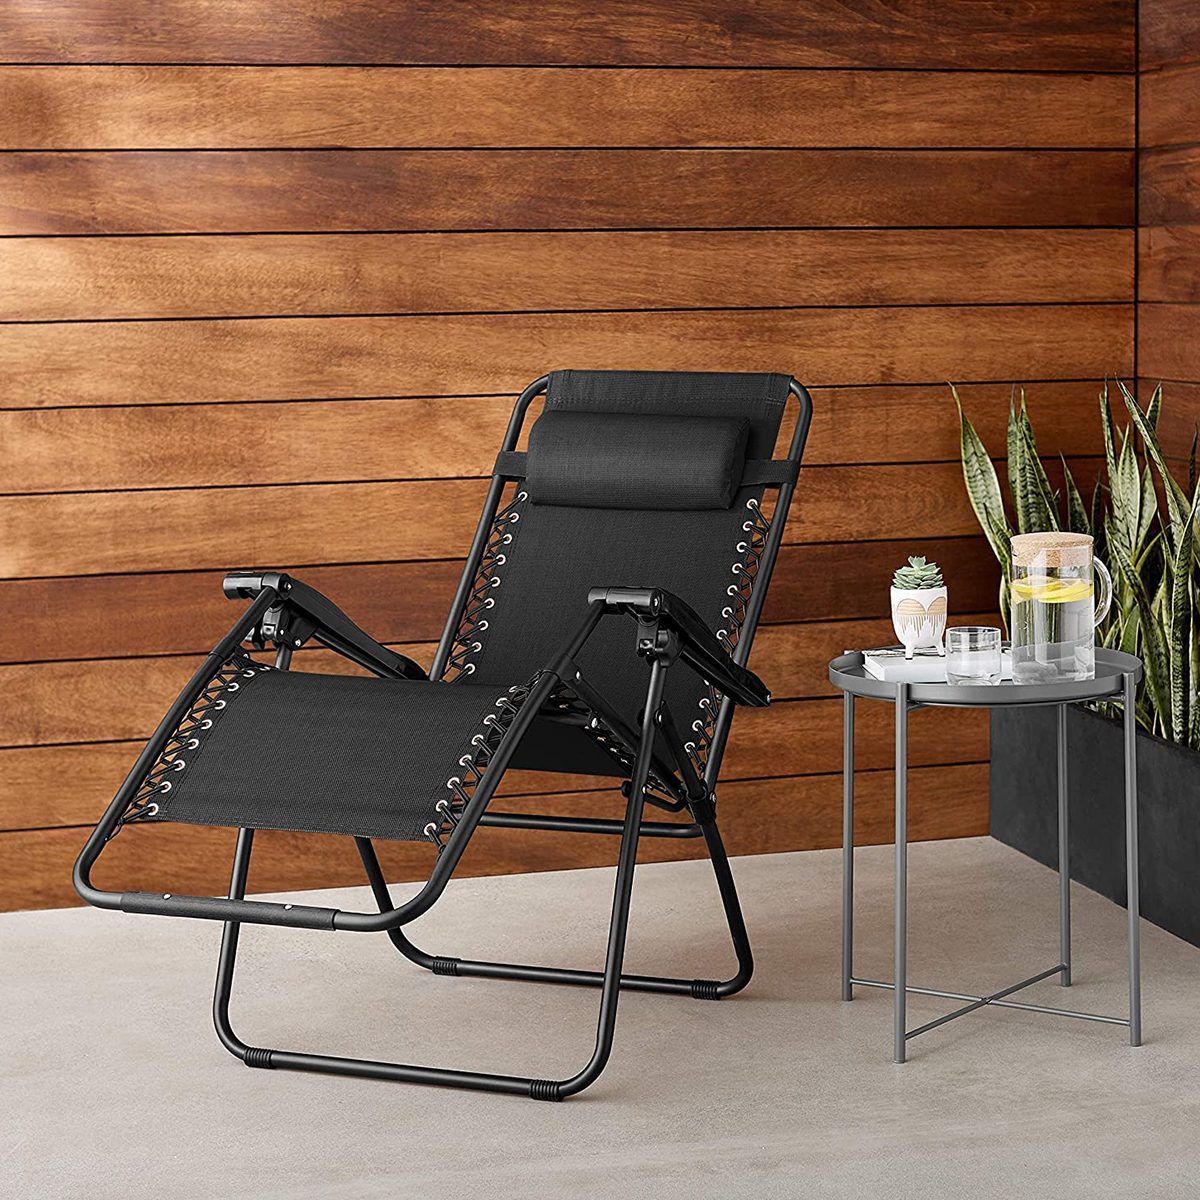 15 Best Amazon Patio Furniture Pieces and Sets to Complete Your Backyard